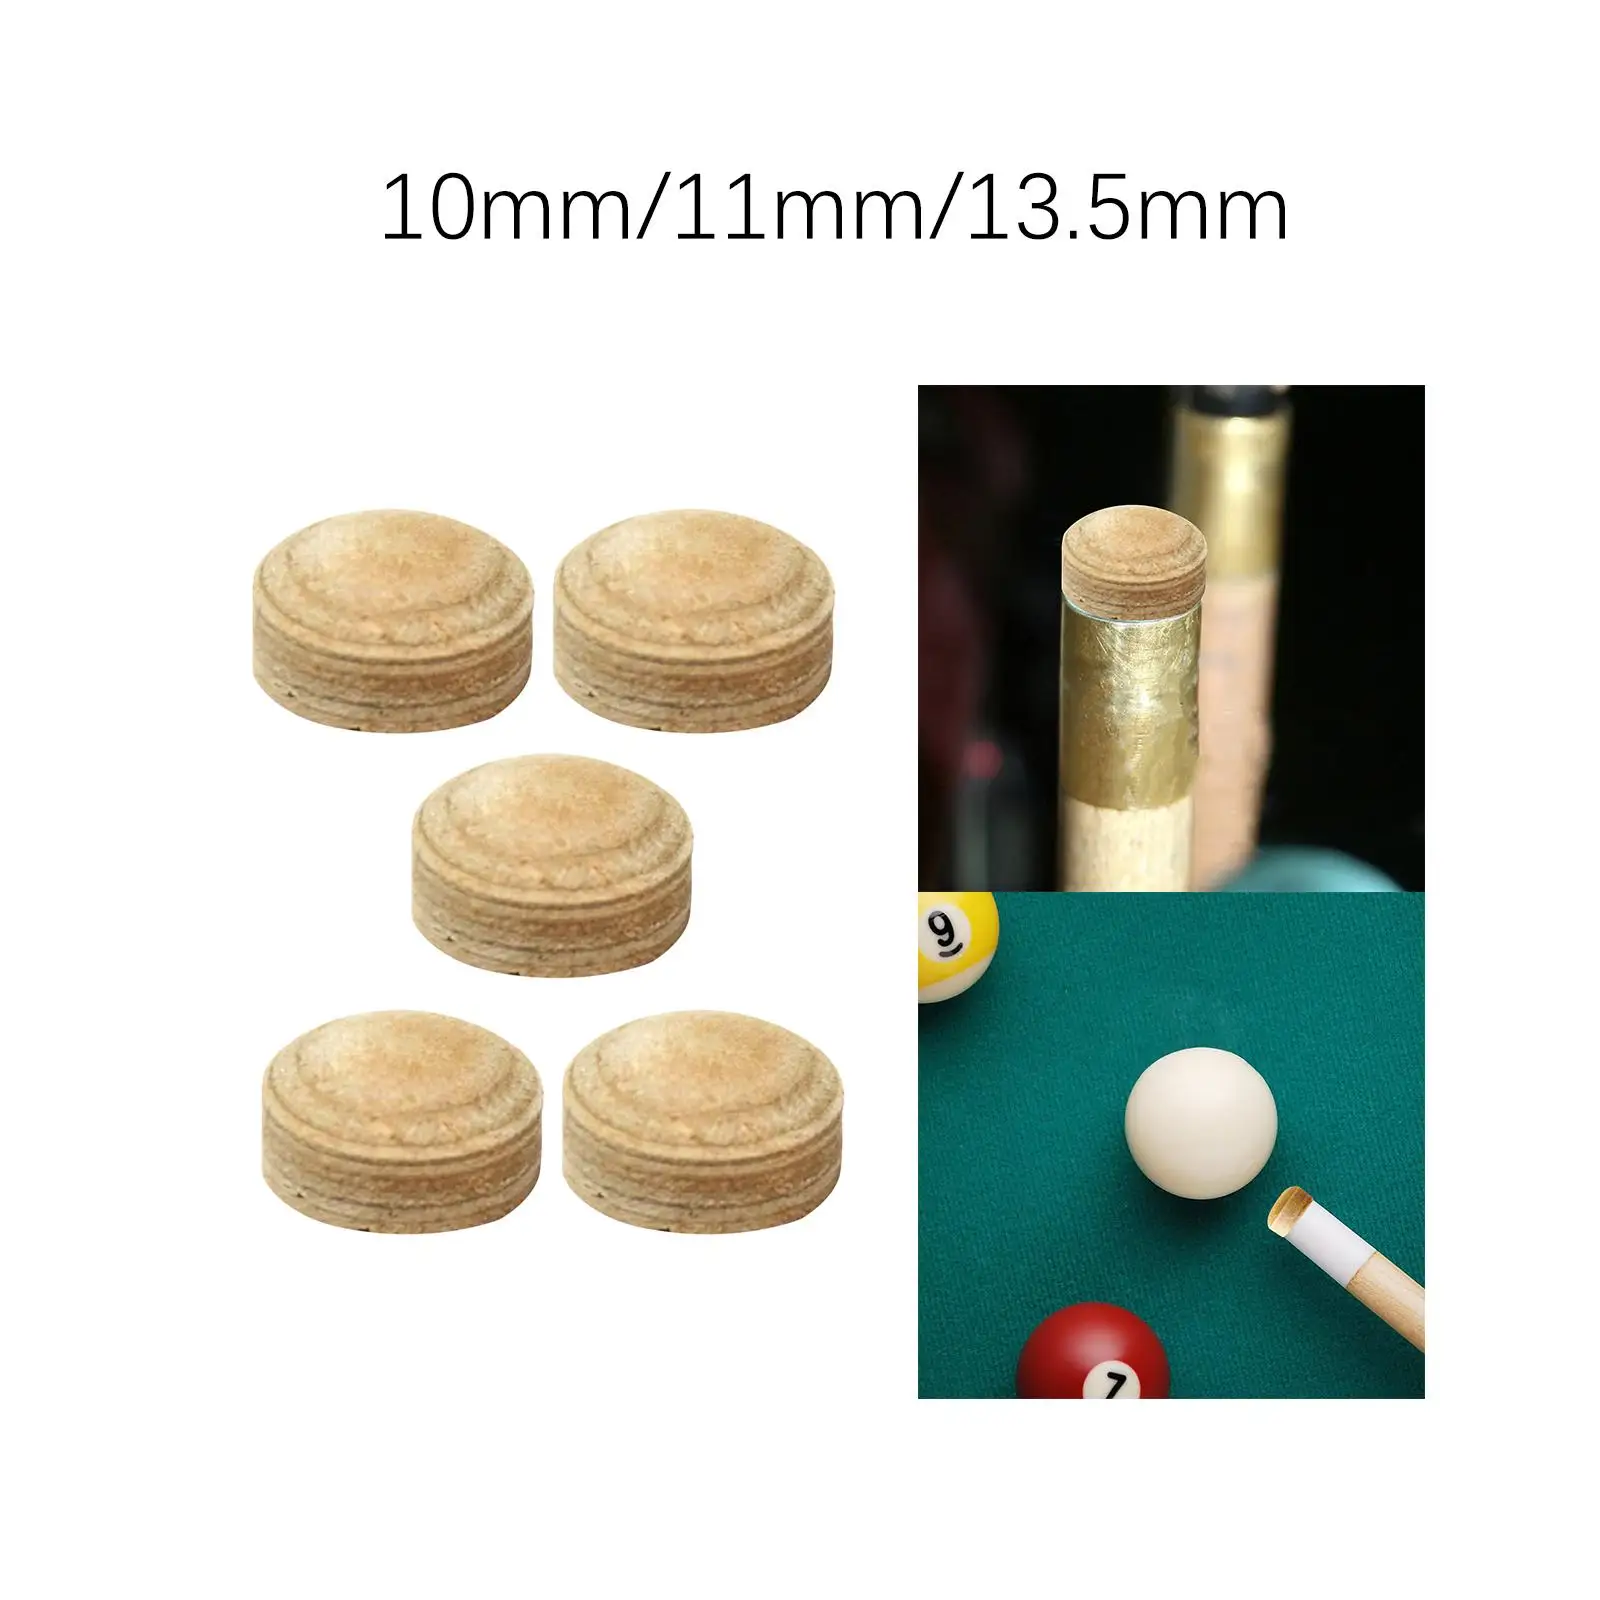 5x Pool Cue Tips Snooker Pool Cue Tips End Tips for Club Pub Personal Use